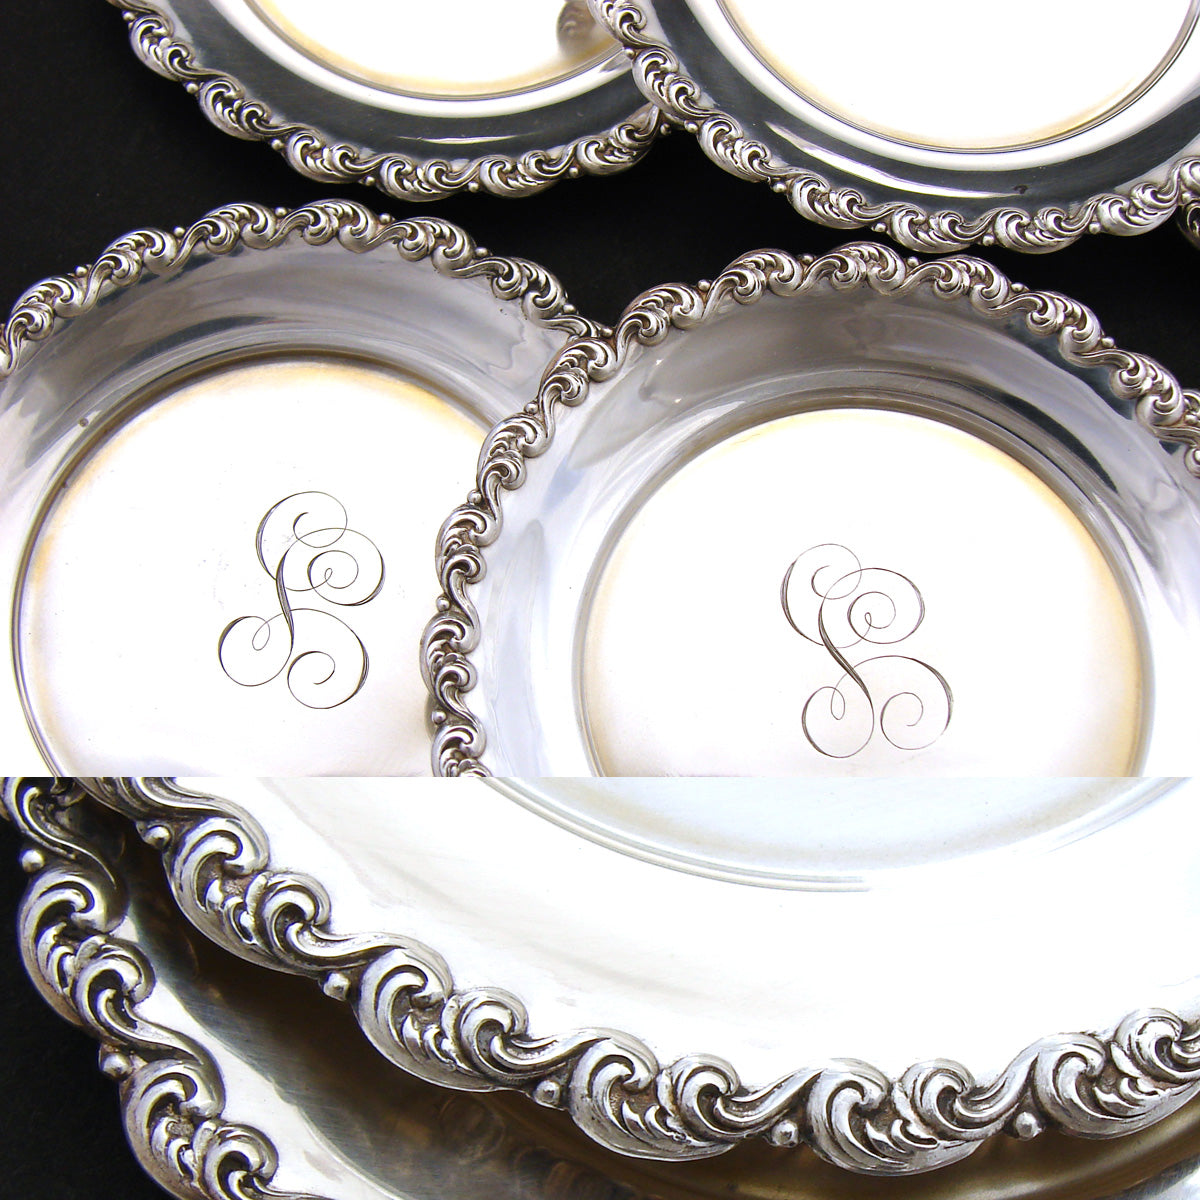 Set of 6 Antique Shreve & Co. San Francisco 3" Nut or Candy Dishes, Ornate Scrolled Borders